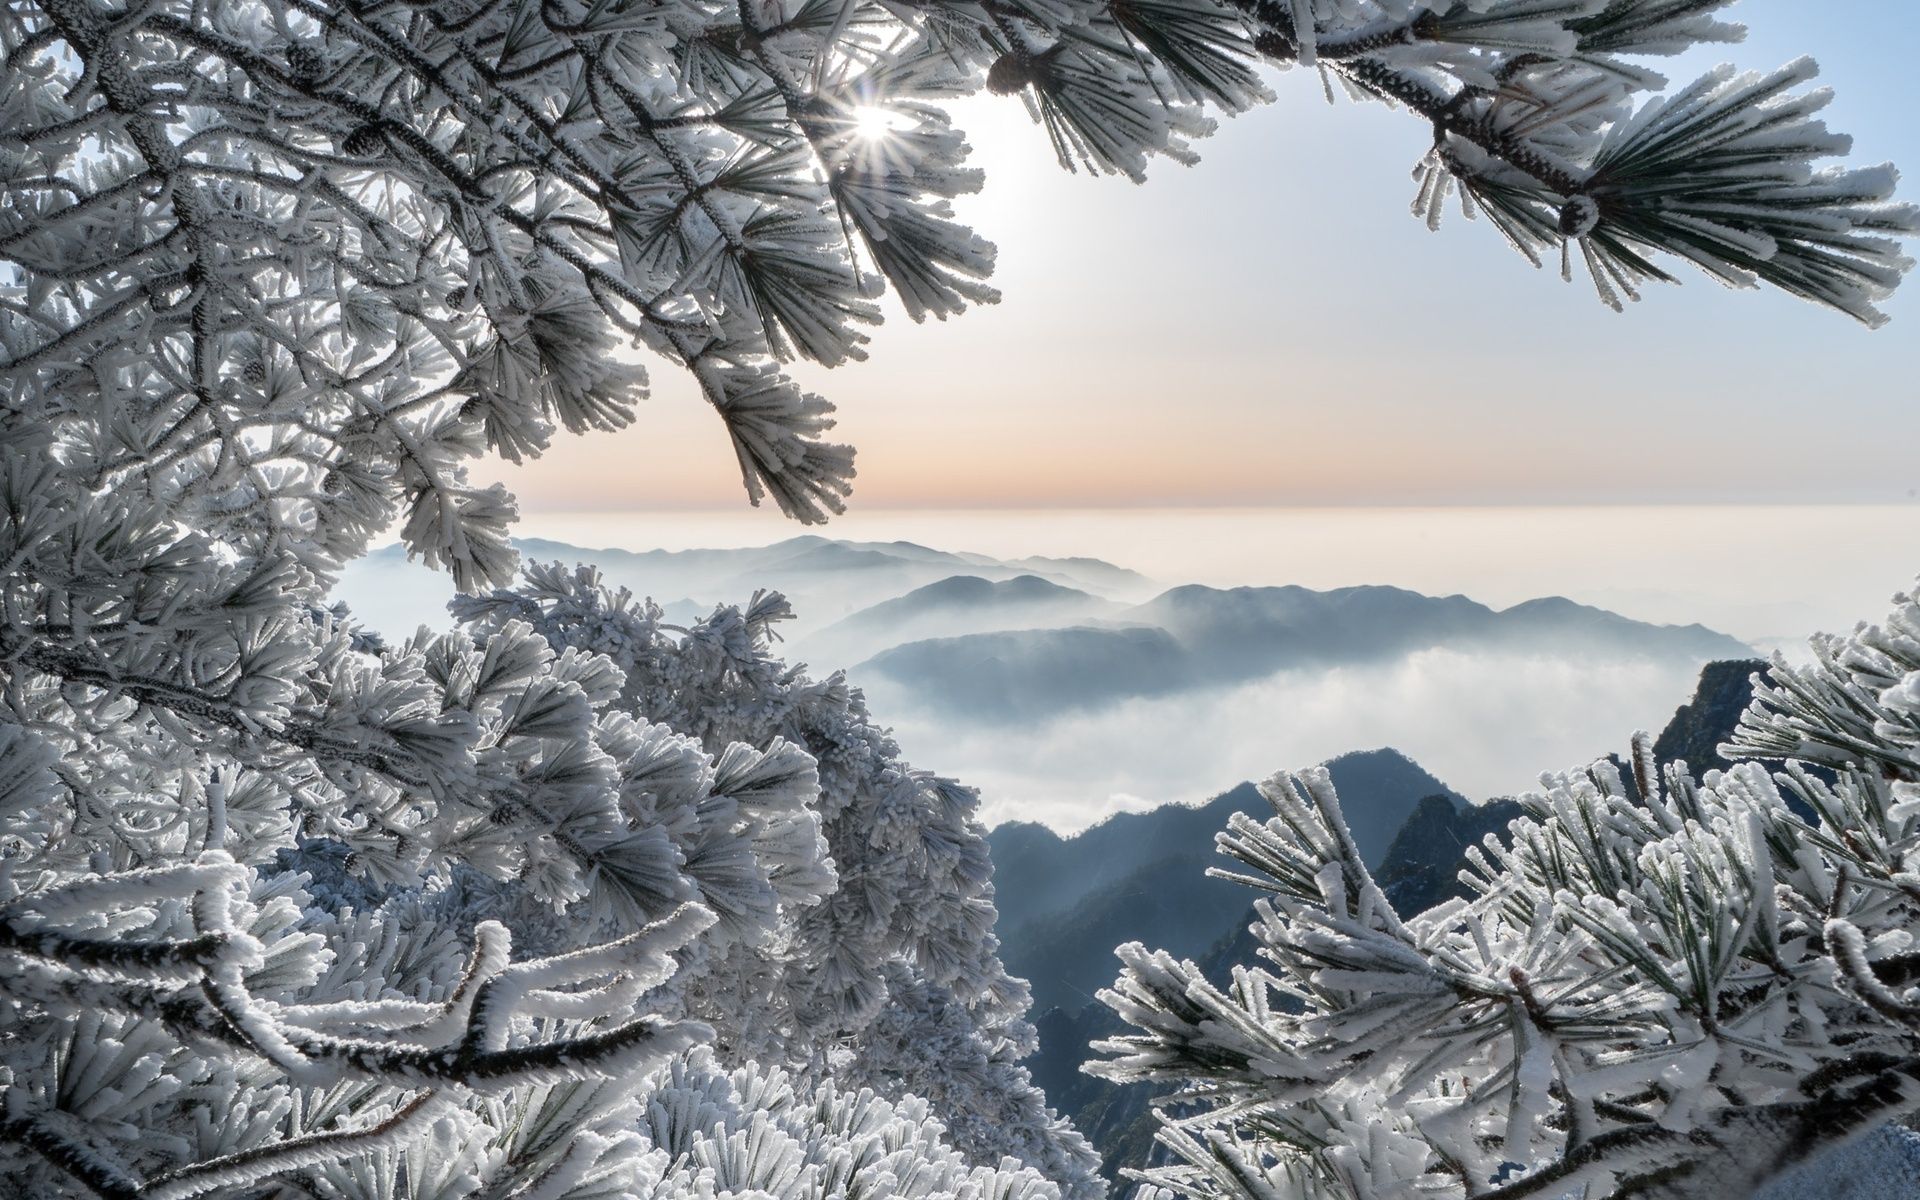 Download wallpaper Huangshan, pines, branches, winter, mountains, China, Asia for desktop with resolution 1920x1200. High Quality HD picture wallpaper